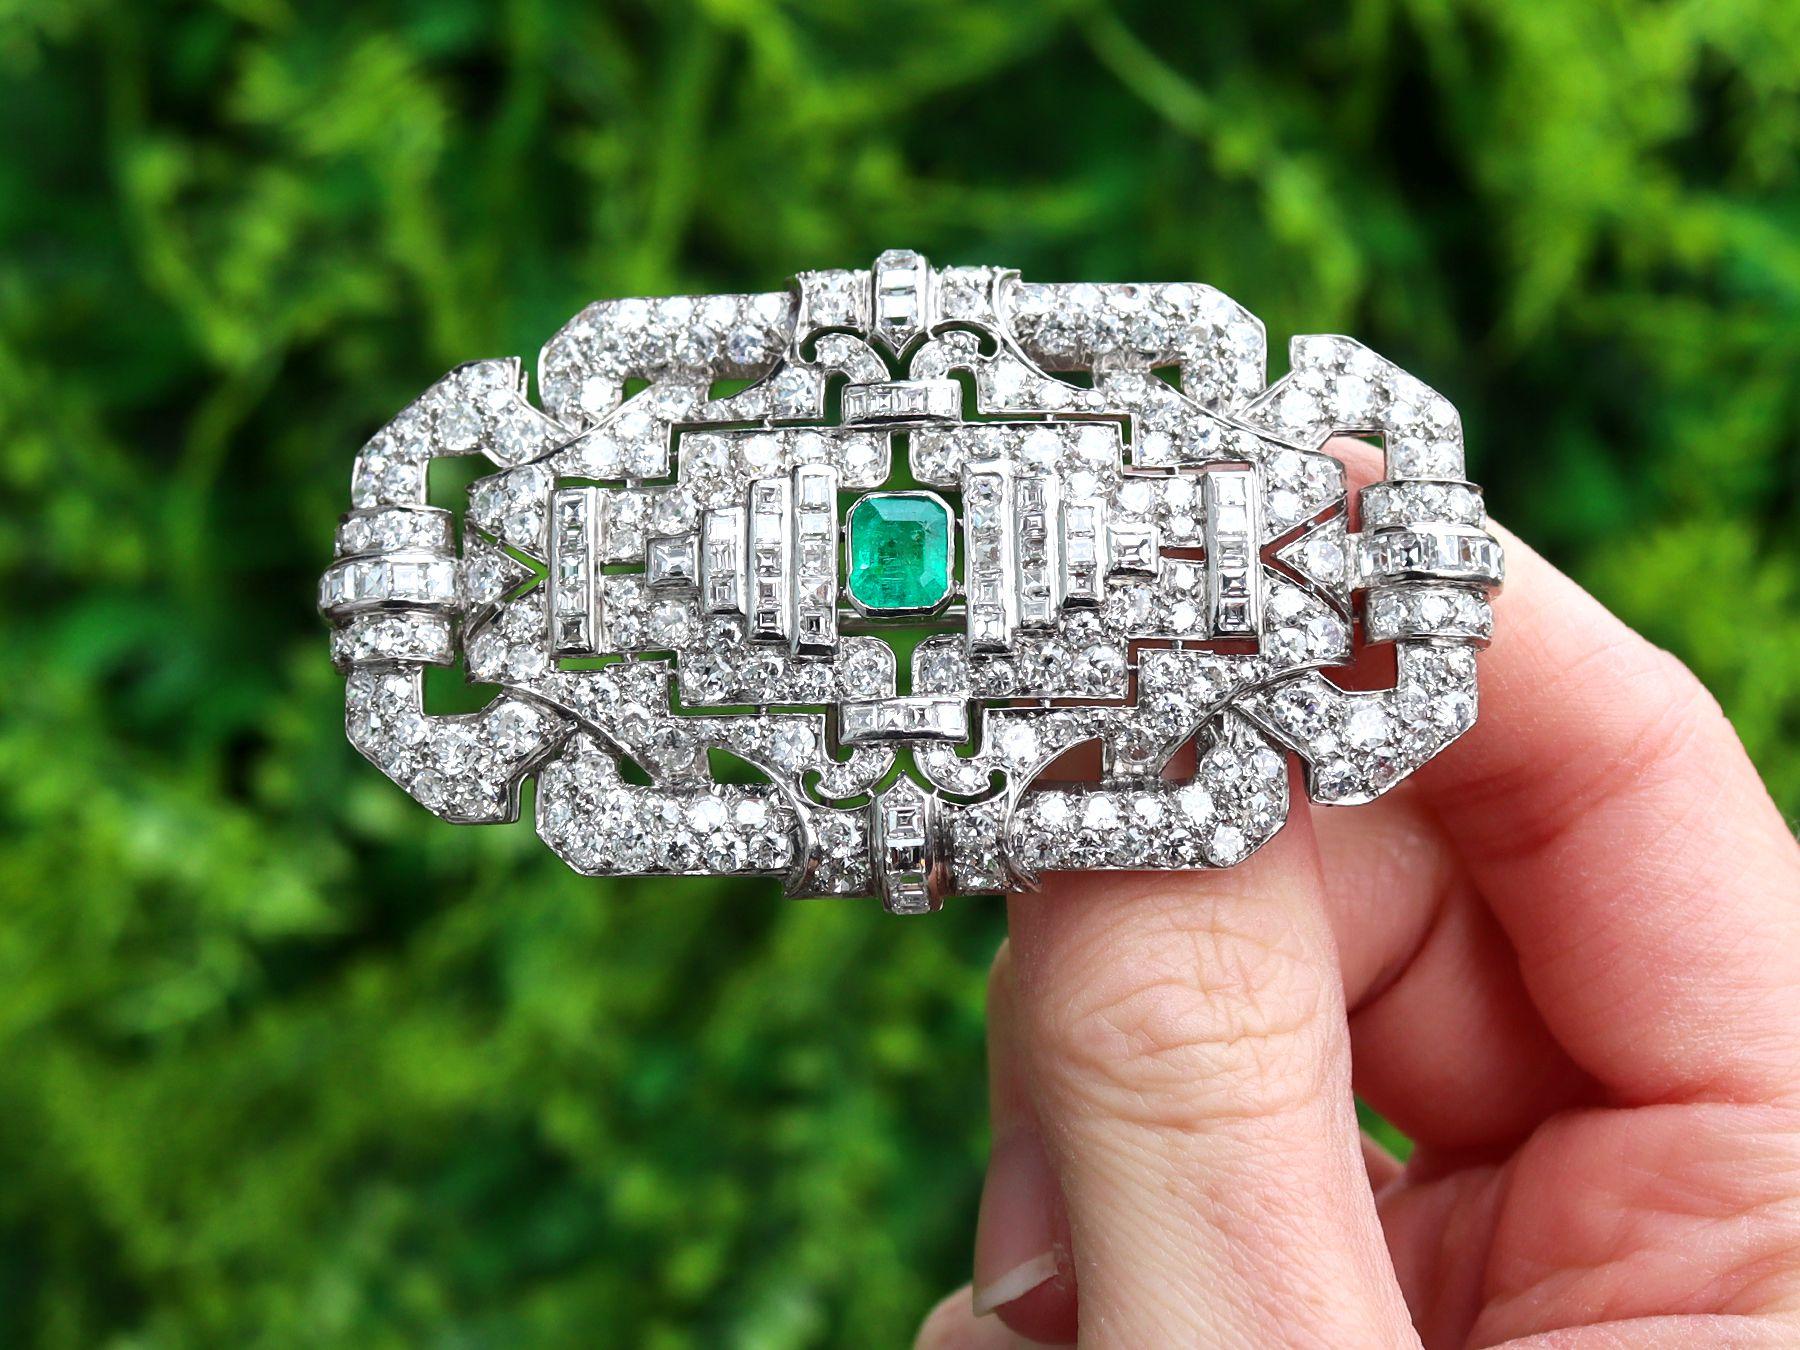 A stunning, fine and impressive 1.02 carat emerald and 11.88 carat diamond brooch in platinum; part of our authentic antique Art Deco jewellery/jewelry collection

This stunning, fine and impressive antique brooch has been crafted in platinum.

The